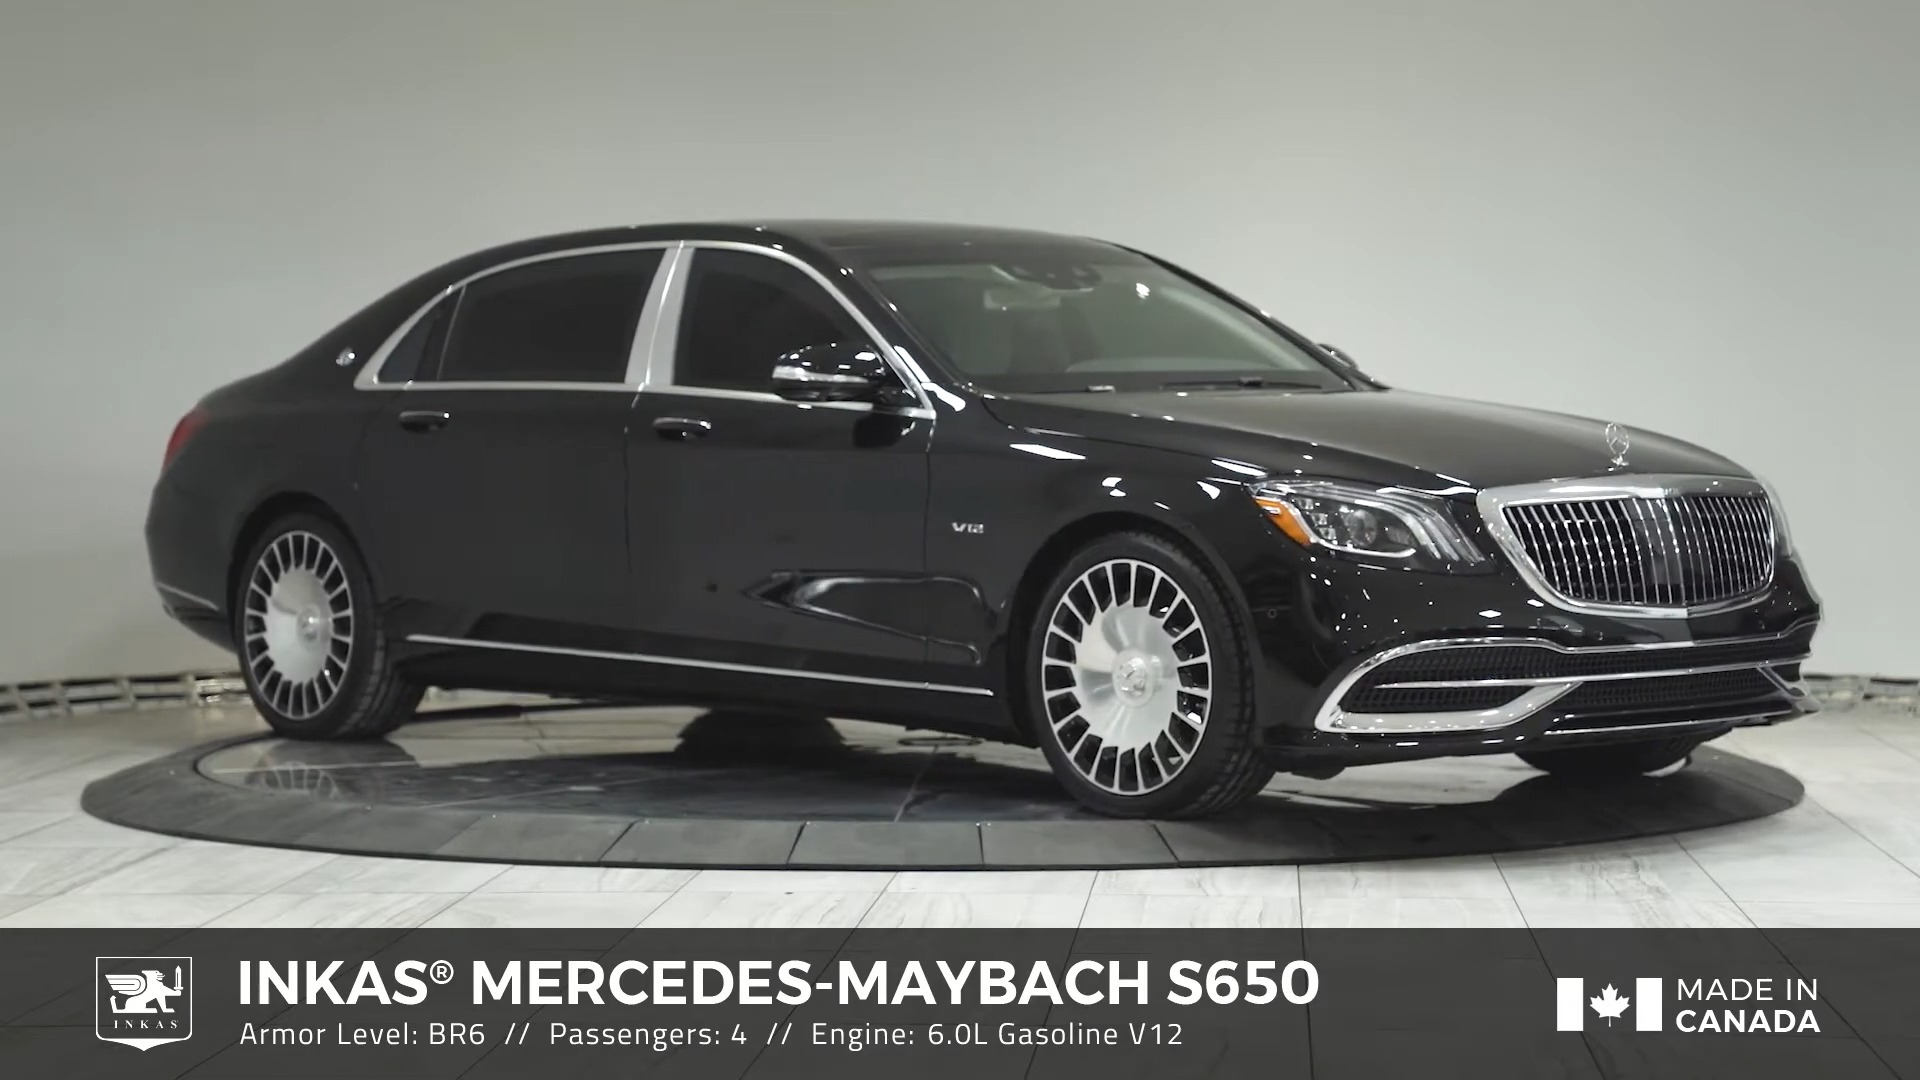 INKAS Armored Mercedes-Benz Maybach S650